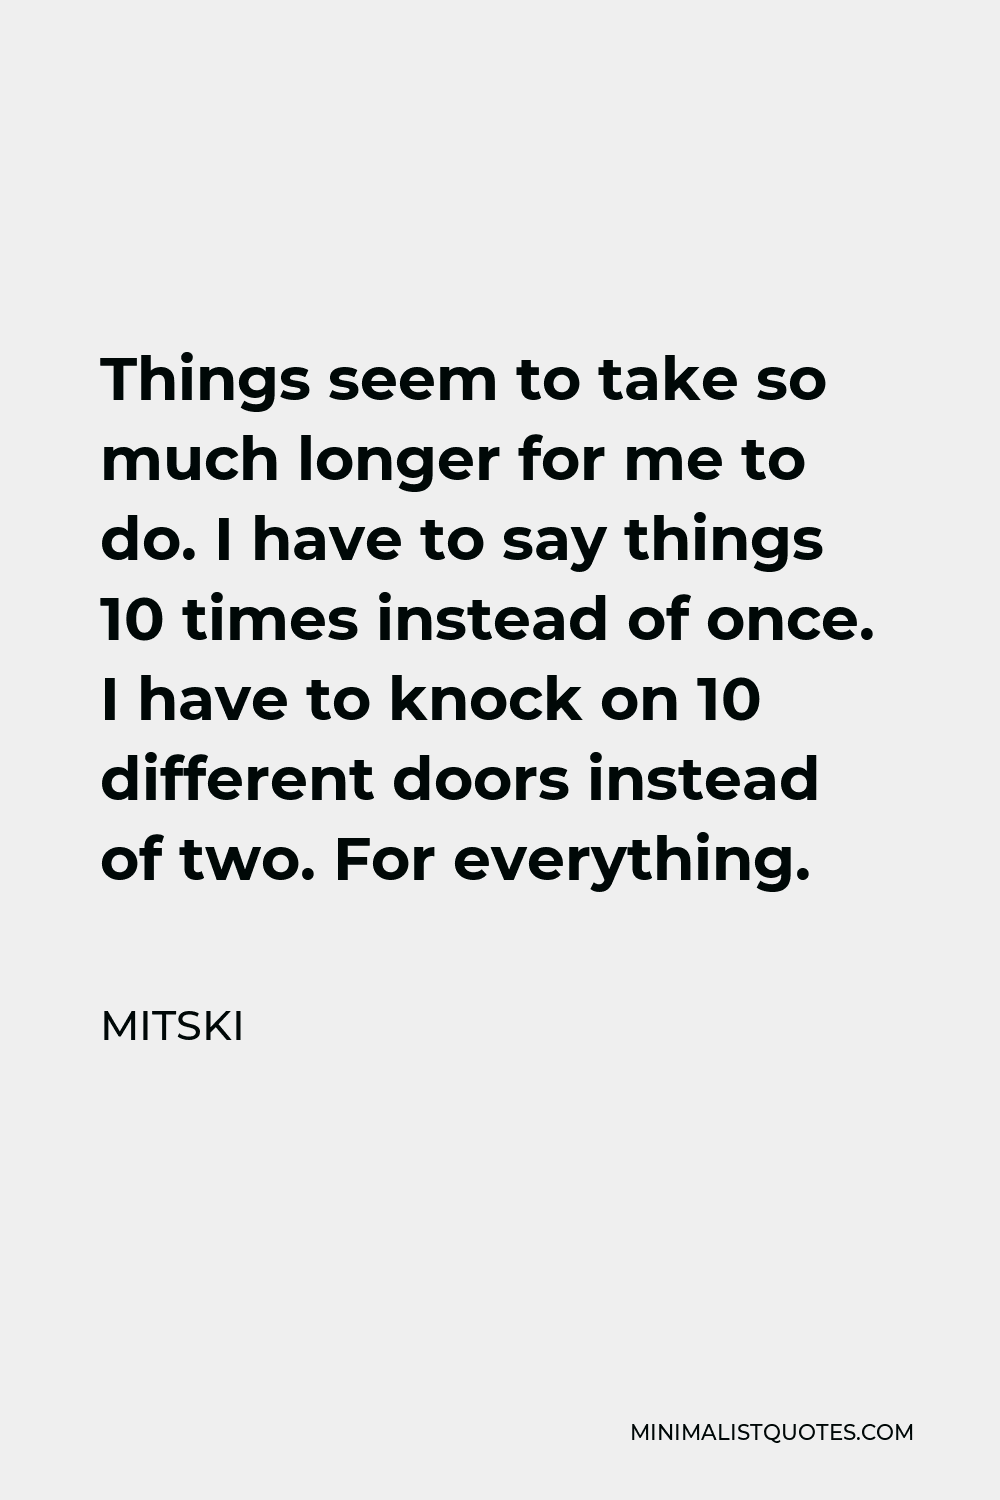 Mitski Quote - Things seem to take so much longer for me to do. I have to say things 10 times instead of once. I have to knock on 10 different doors instead of two. For everything.